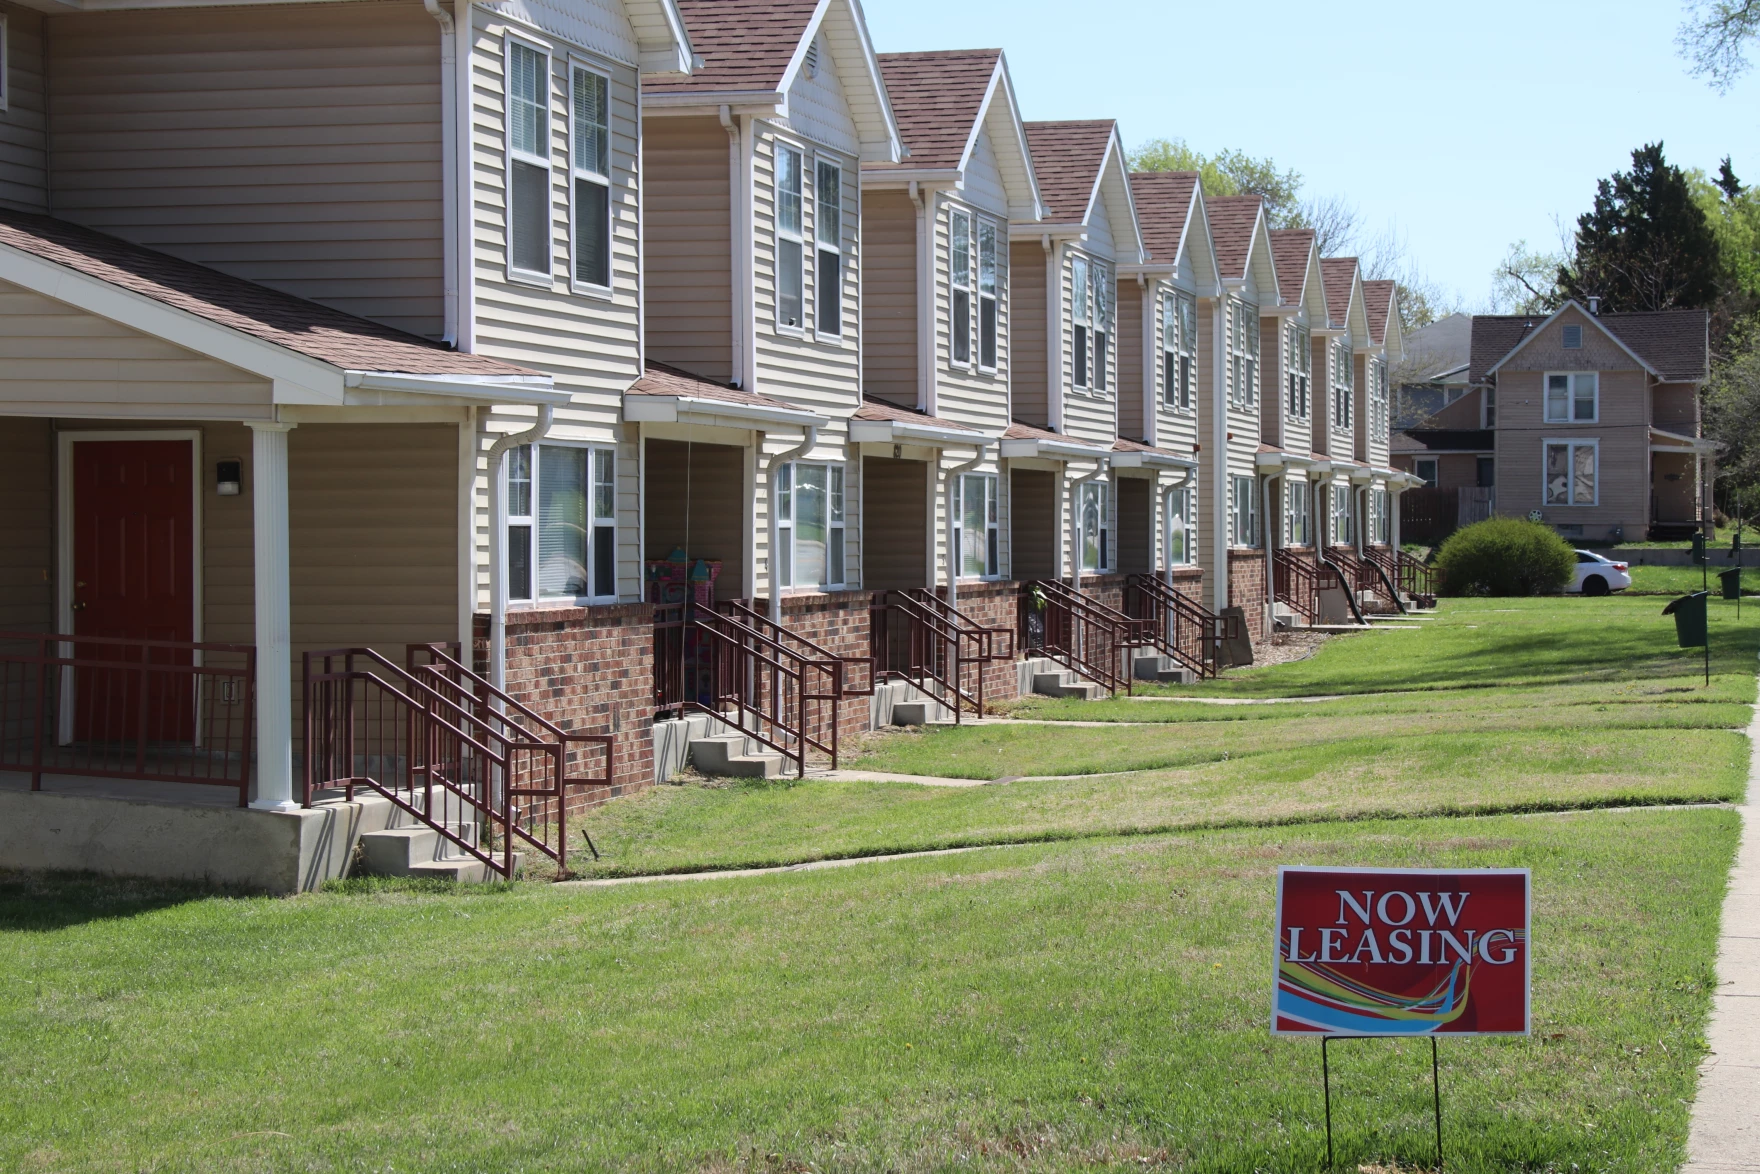 Row of houses with a "Now Leasing" sign in the yard